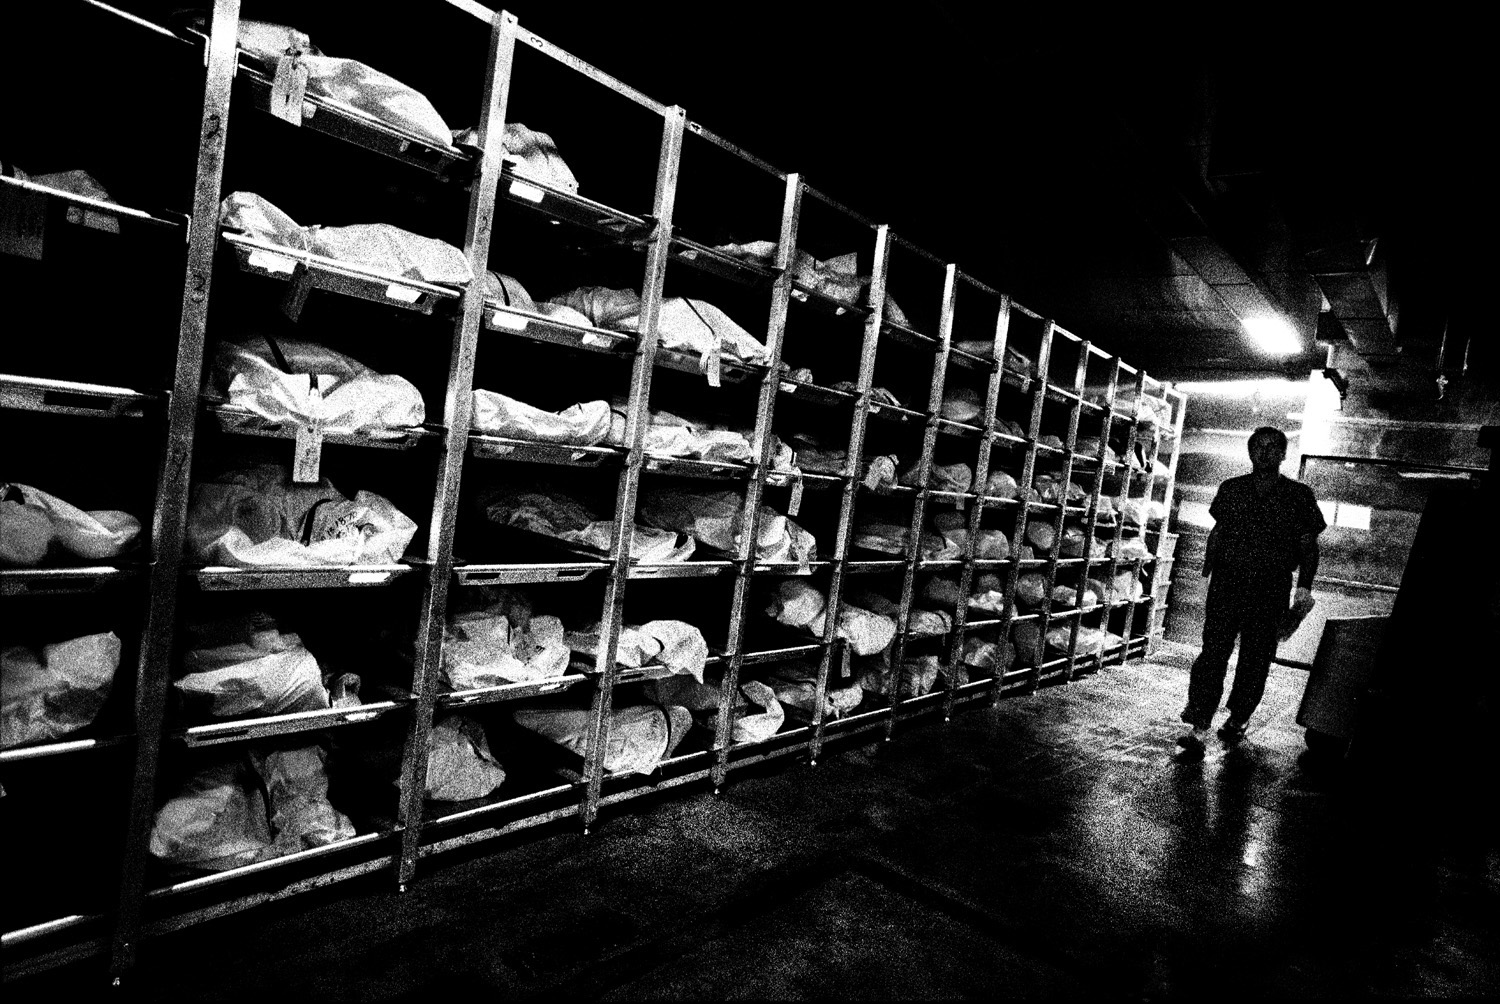 Tucson, Ariz. | 
                              July 30, 2013
                              
                              At the Pima County Office of the Medical Examiner, the remains of migrants found near the border are inspected and stored.